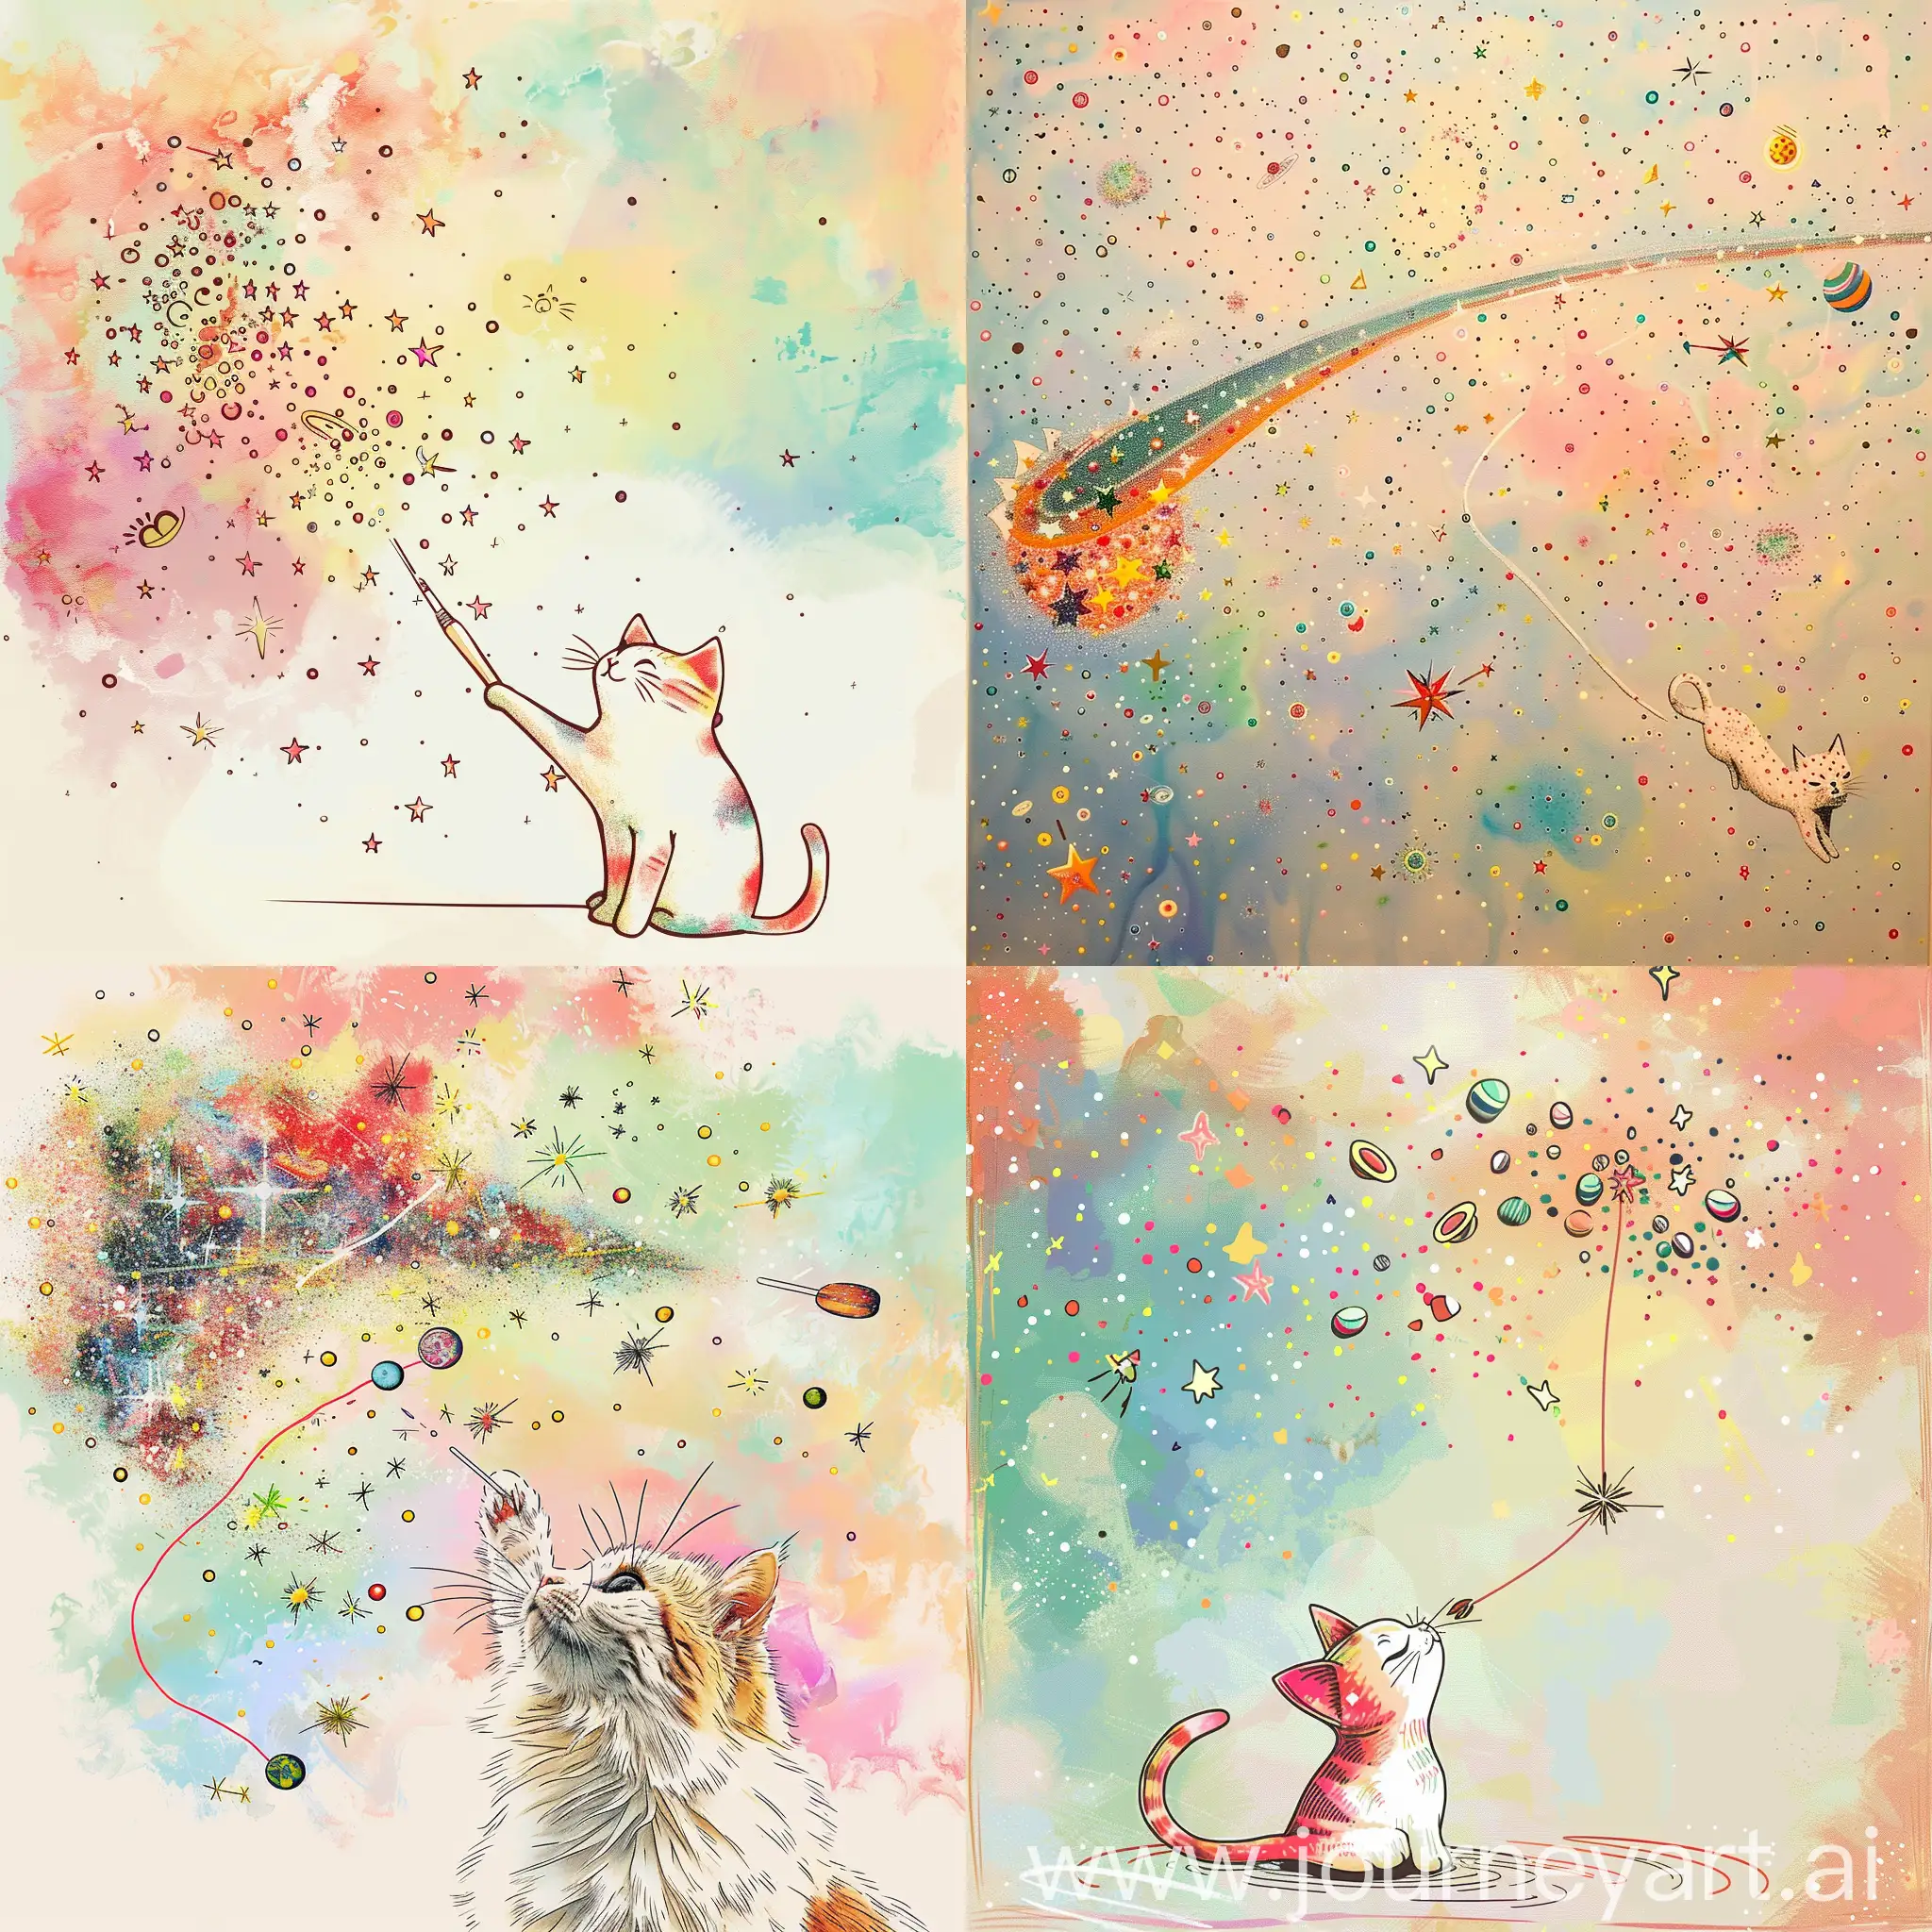 Vibrant-HandDrawn-Universe-with-Multicolored-Stars-and-Playful-Cat